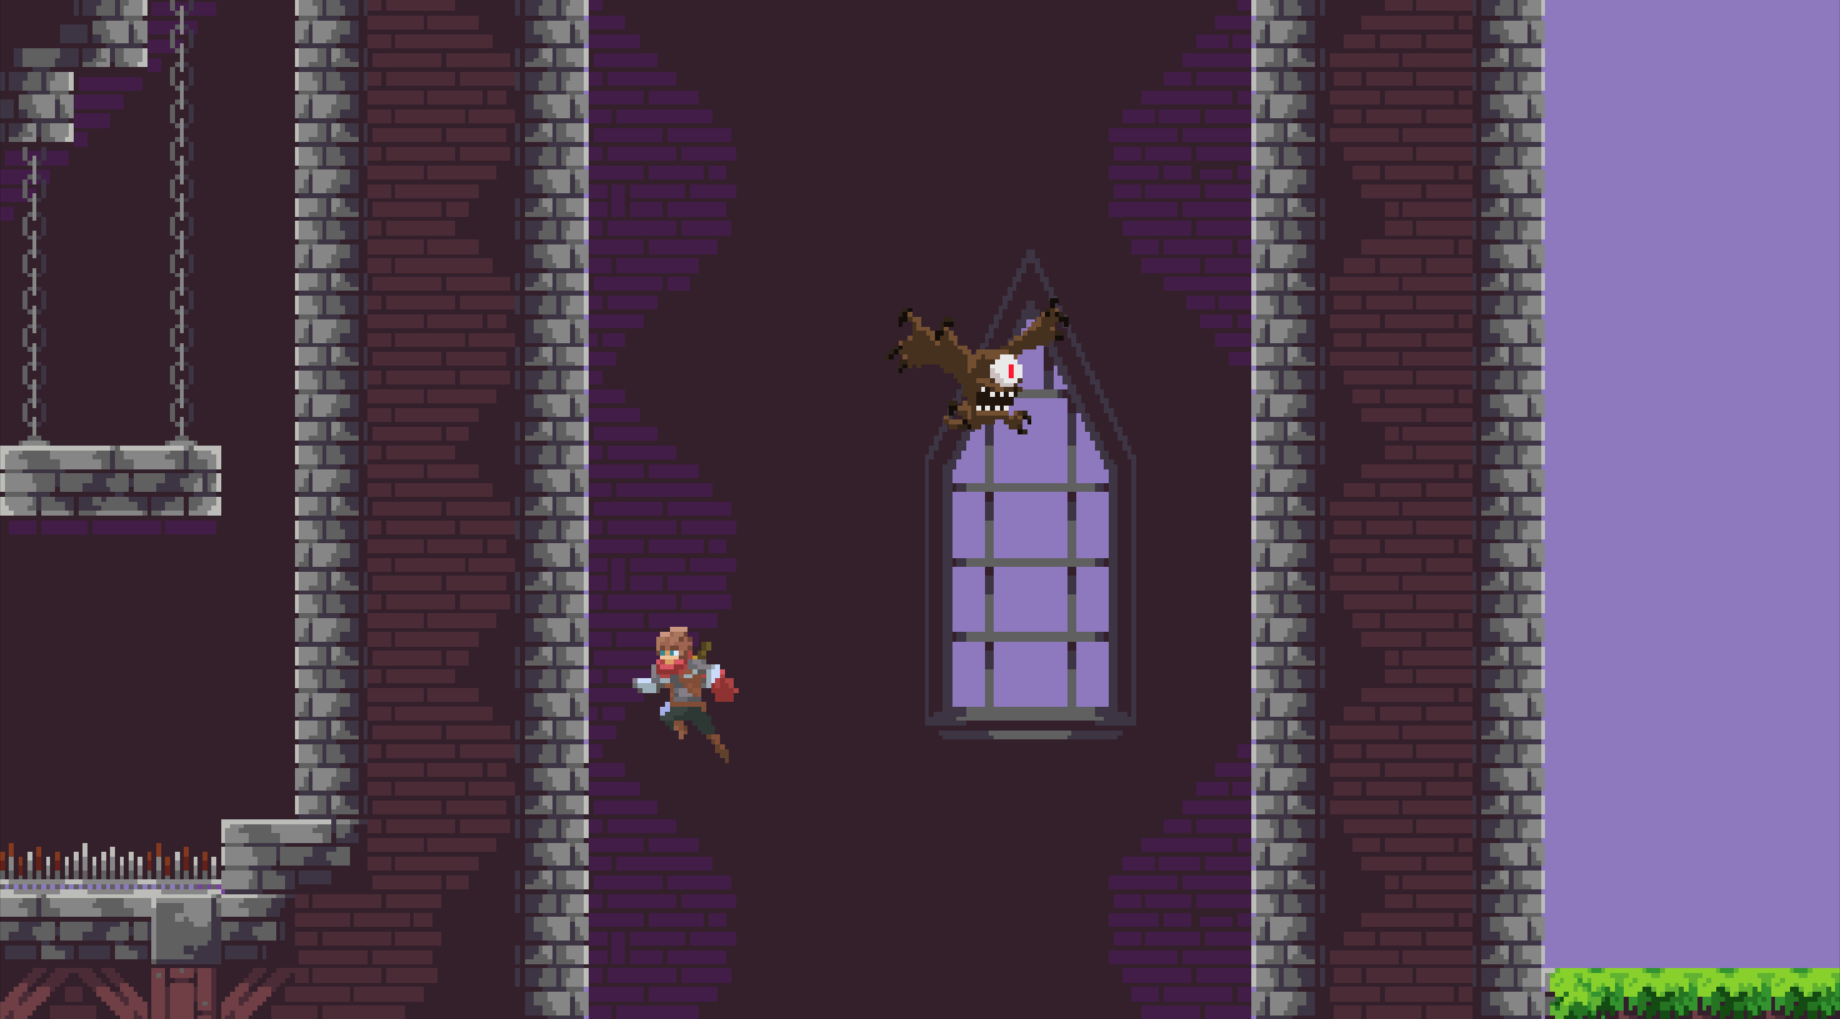 Jumping across walls minigame